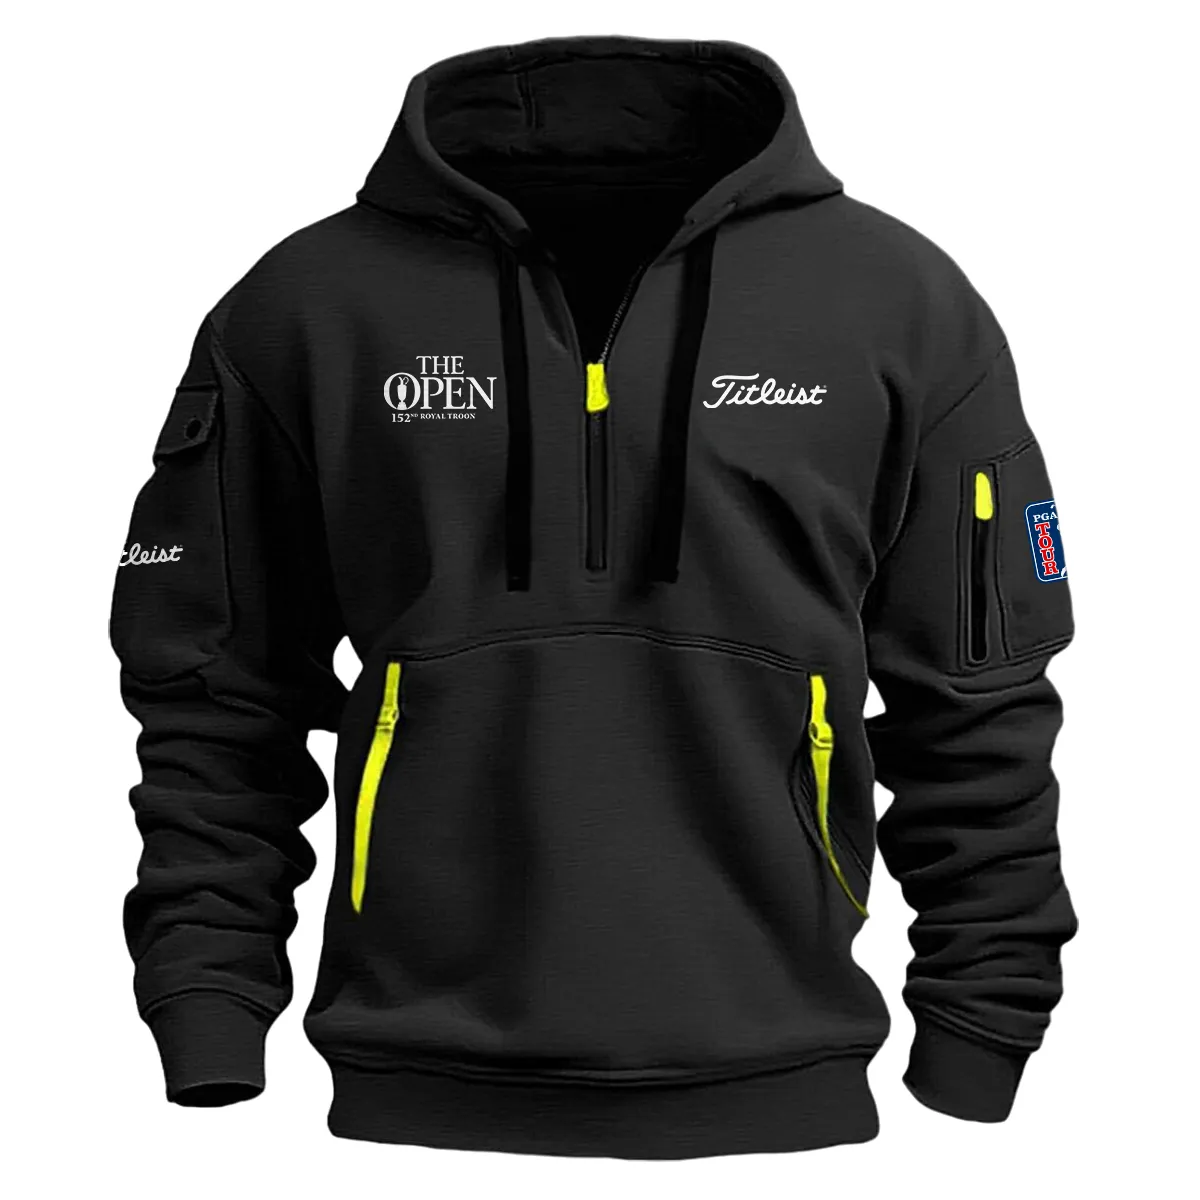 Black Color Titleist Fashion Hoodie Half Zipper 152nd The Open Championship Gift For Fans